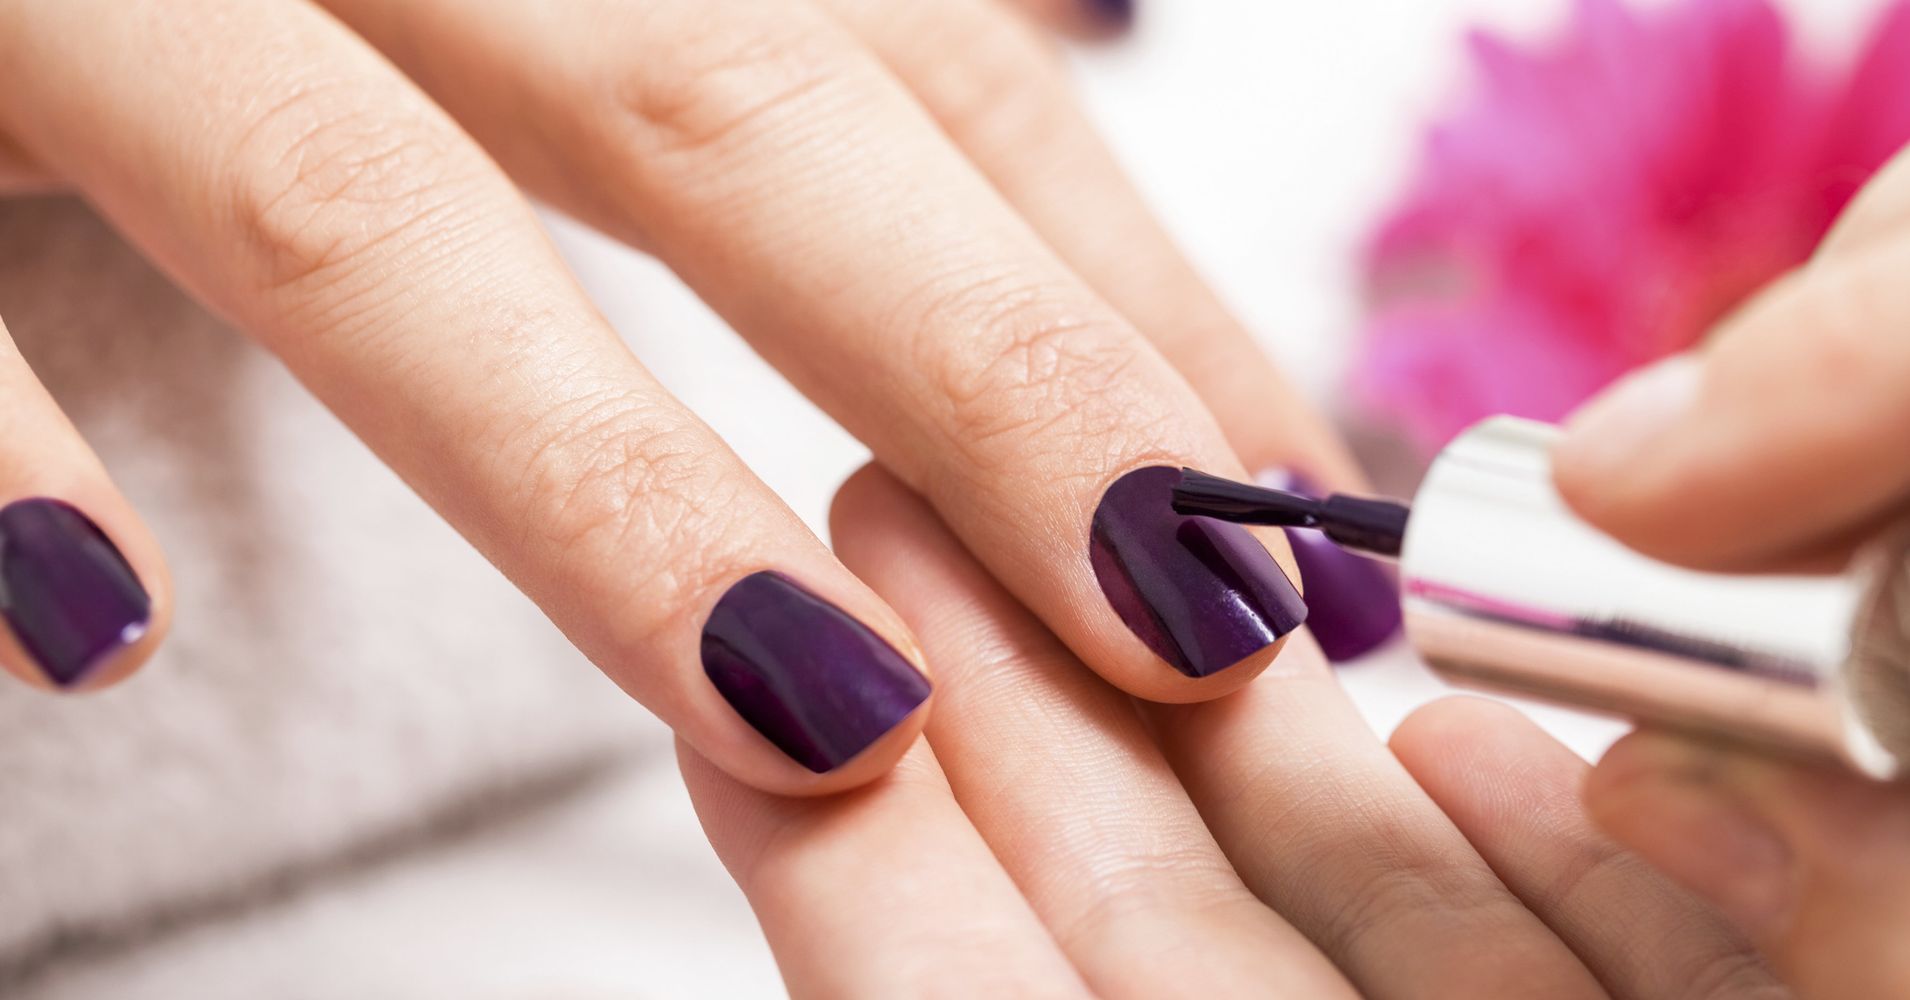 8. Sleek and Dark: Nail Polish Colors for a Dramatic and Edgy Look - wide 6